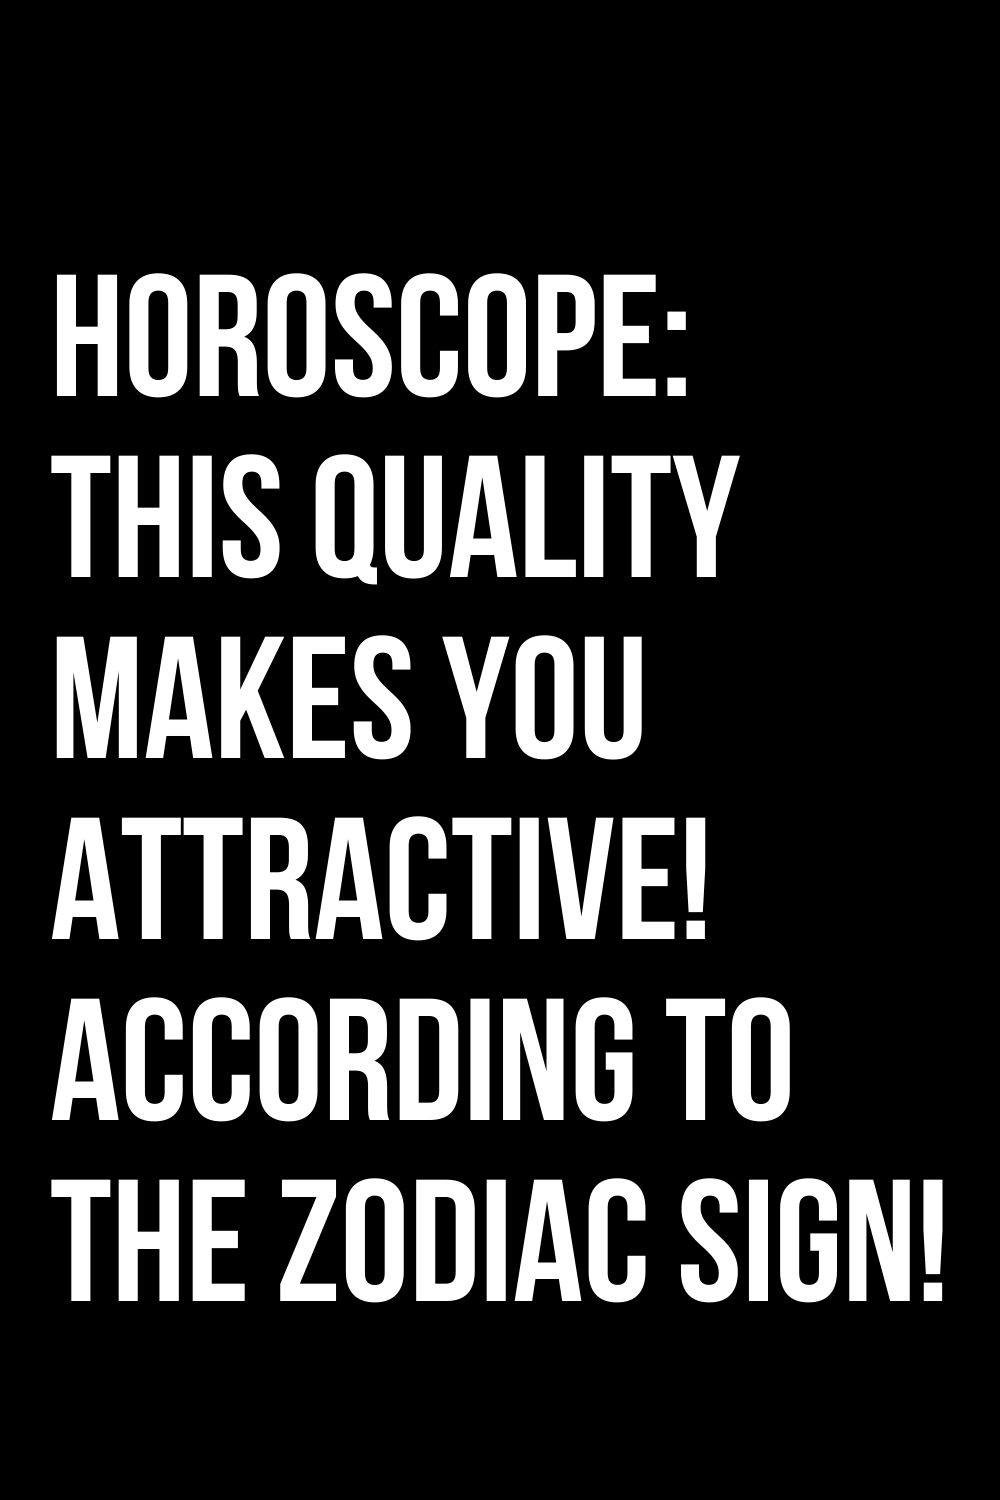 Horoscope: this quality makes you attractive! According to the zodiac ...